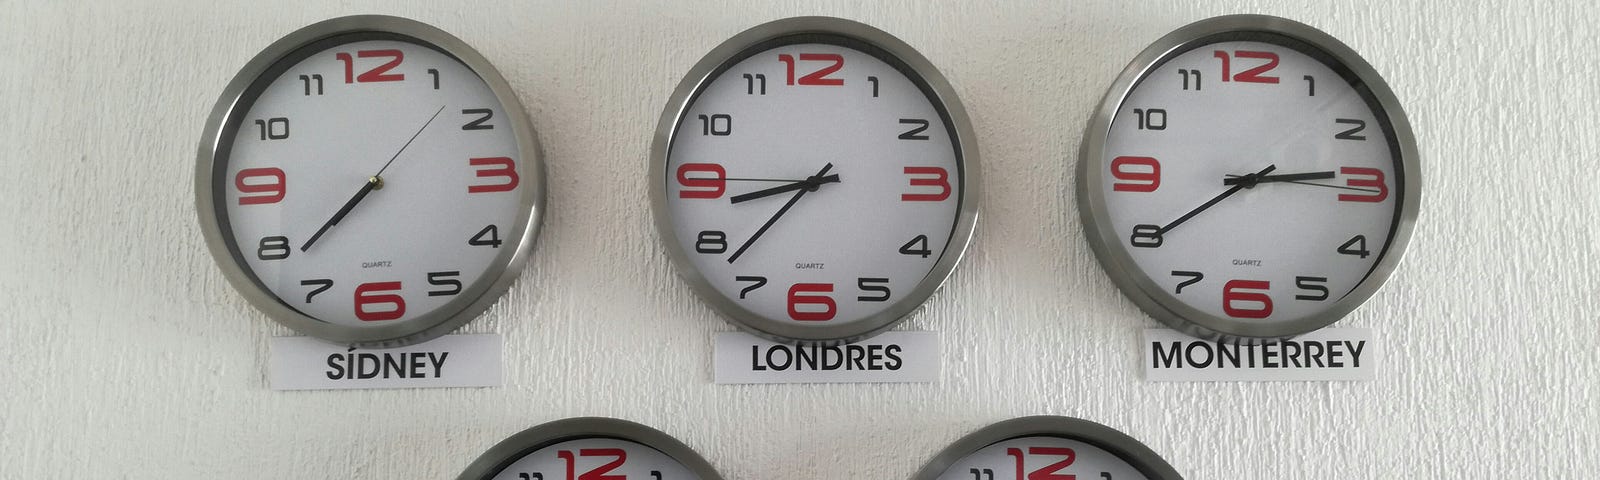 A series of clocks set to different city times